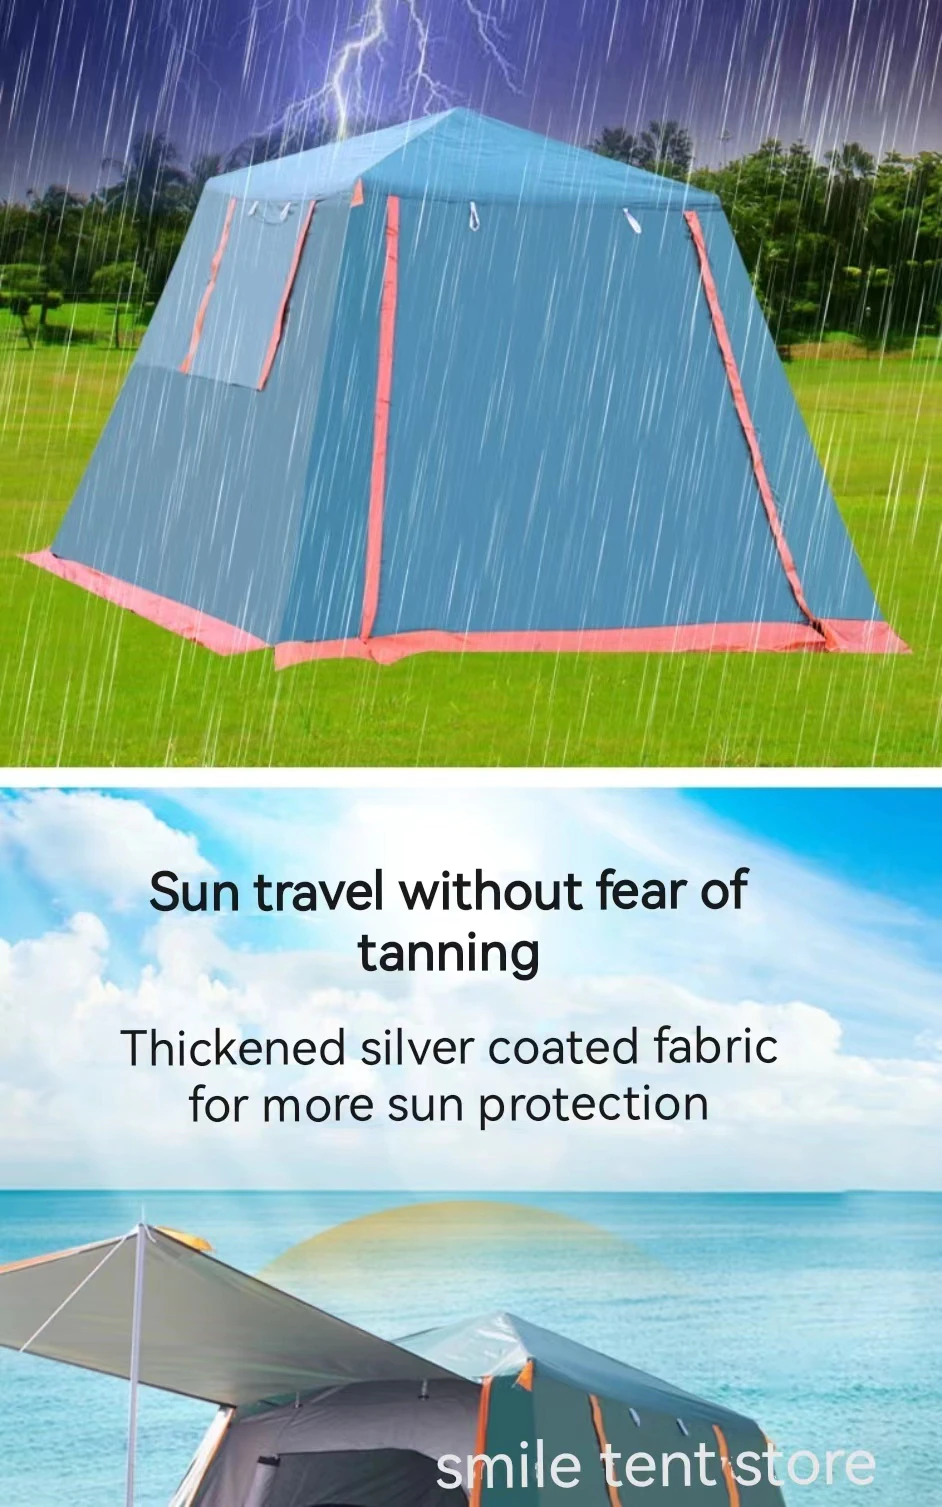 Cheap Goat Tents Outdoor Hydraulic Automatic 4 6 Air defense Rainstorm Double Camping Tent Camping Is Prevented Bask In Tents   